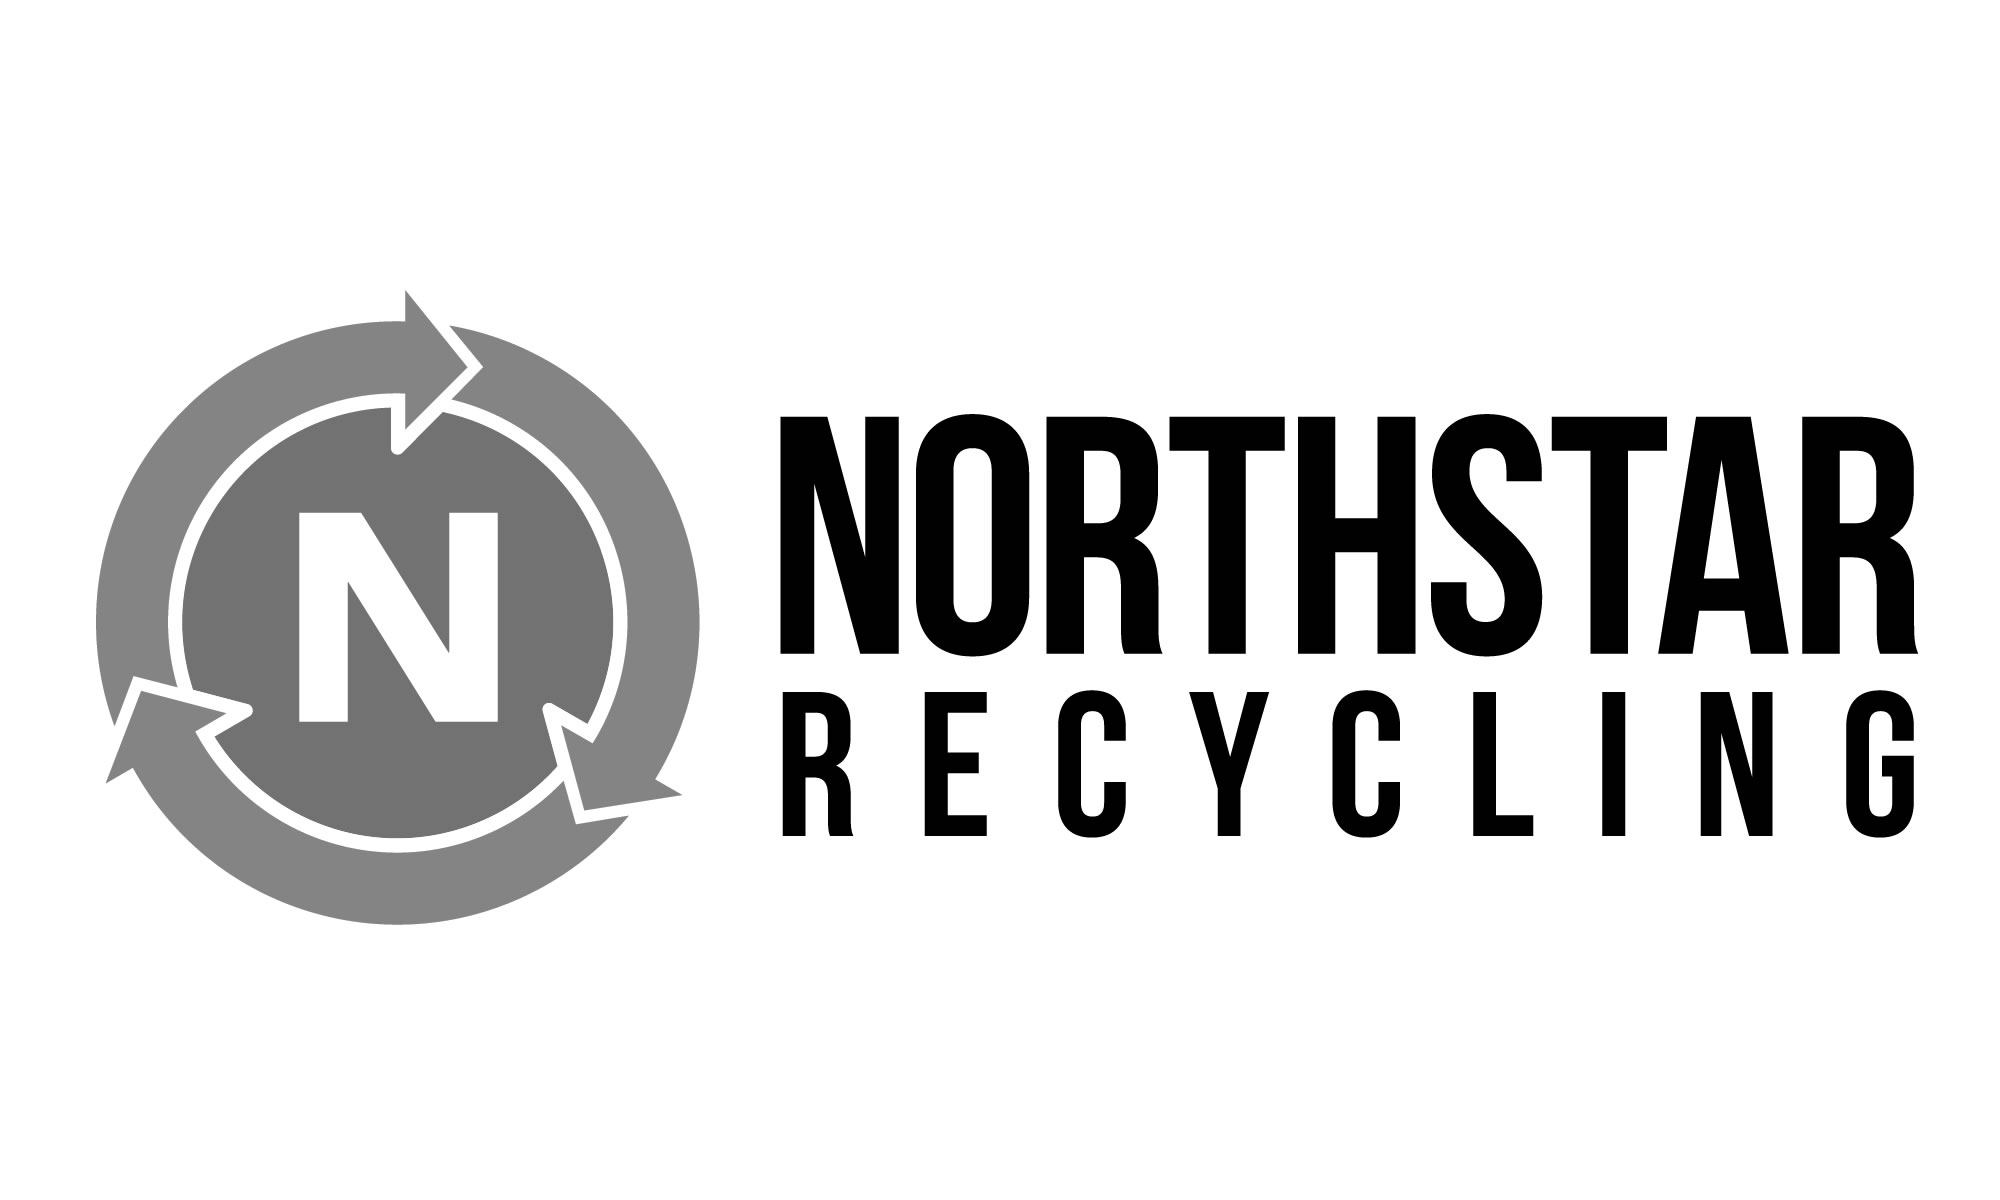 Northstar Recycling is a national recycling company, founded on the belief that waste has value. Our mission is to help manufacturing, distribution, and other businesses recycle more and landfill less. Contact us today to discover the opportunities waiting in your waste stream.